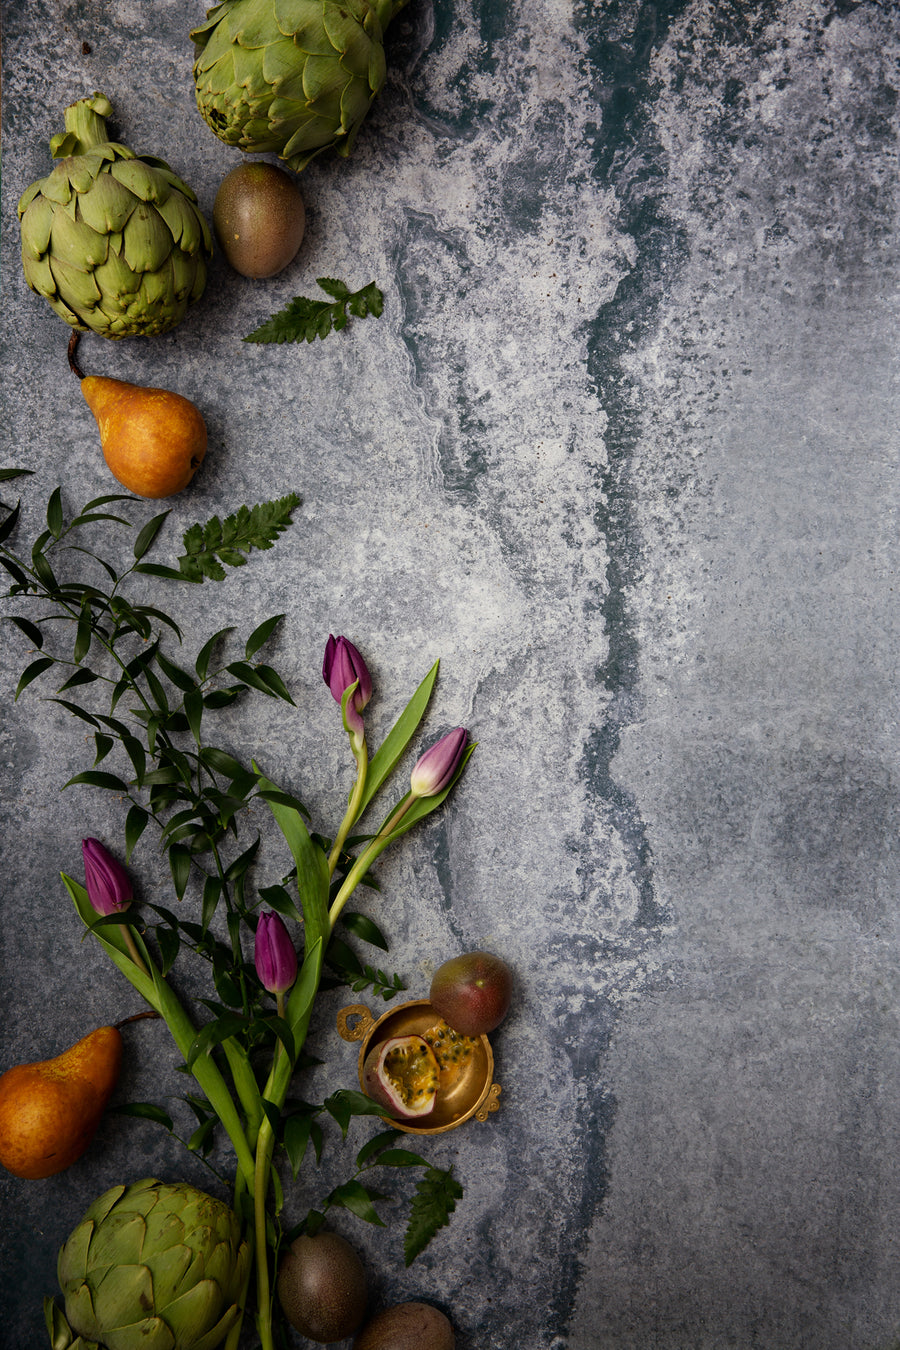 Rustic blue metal photography surface with pears, artichokes and flowers